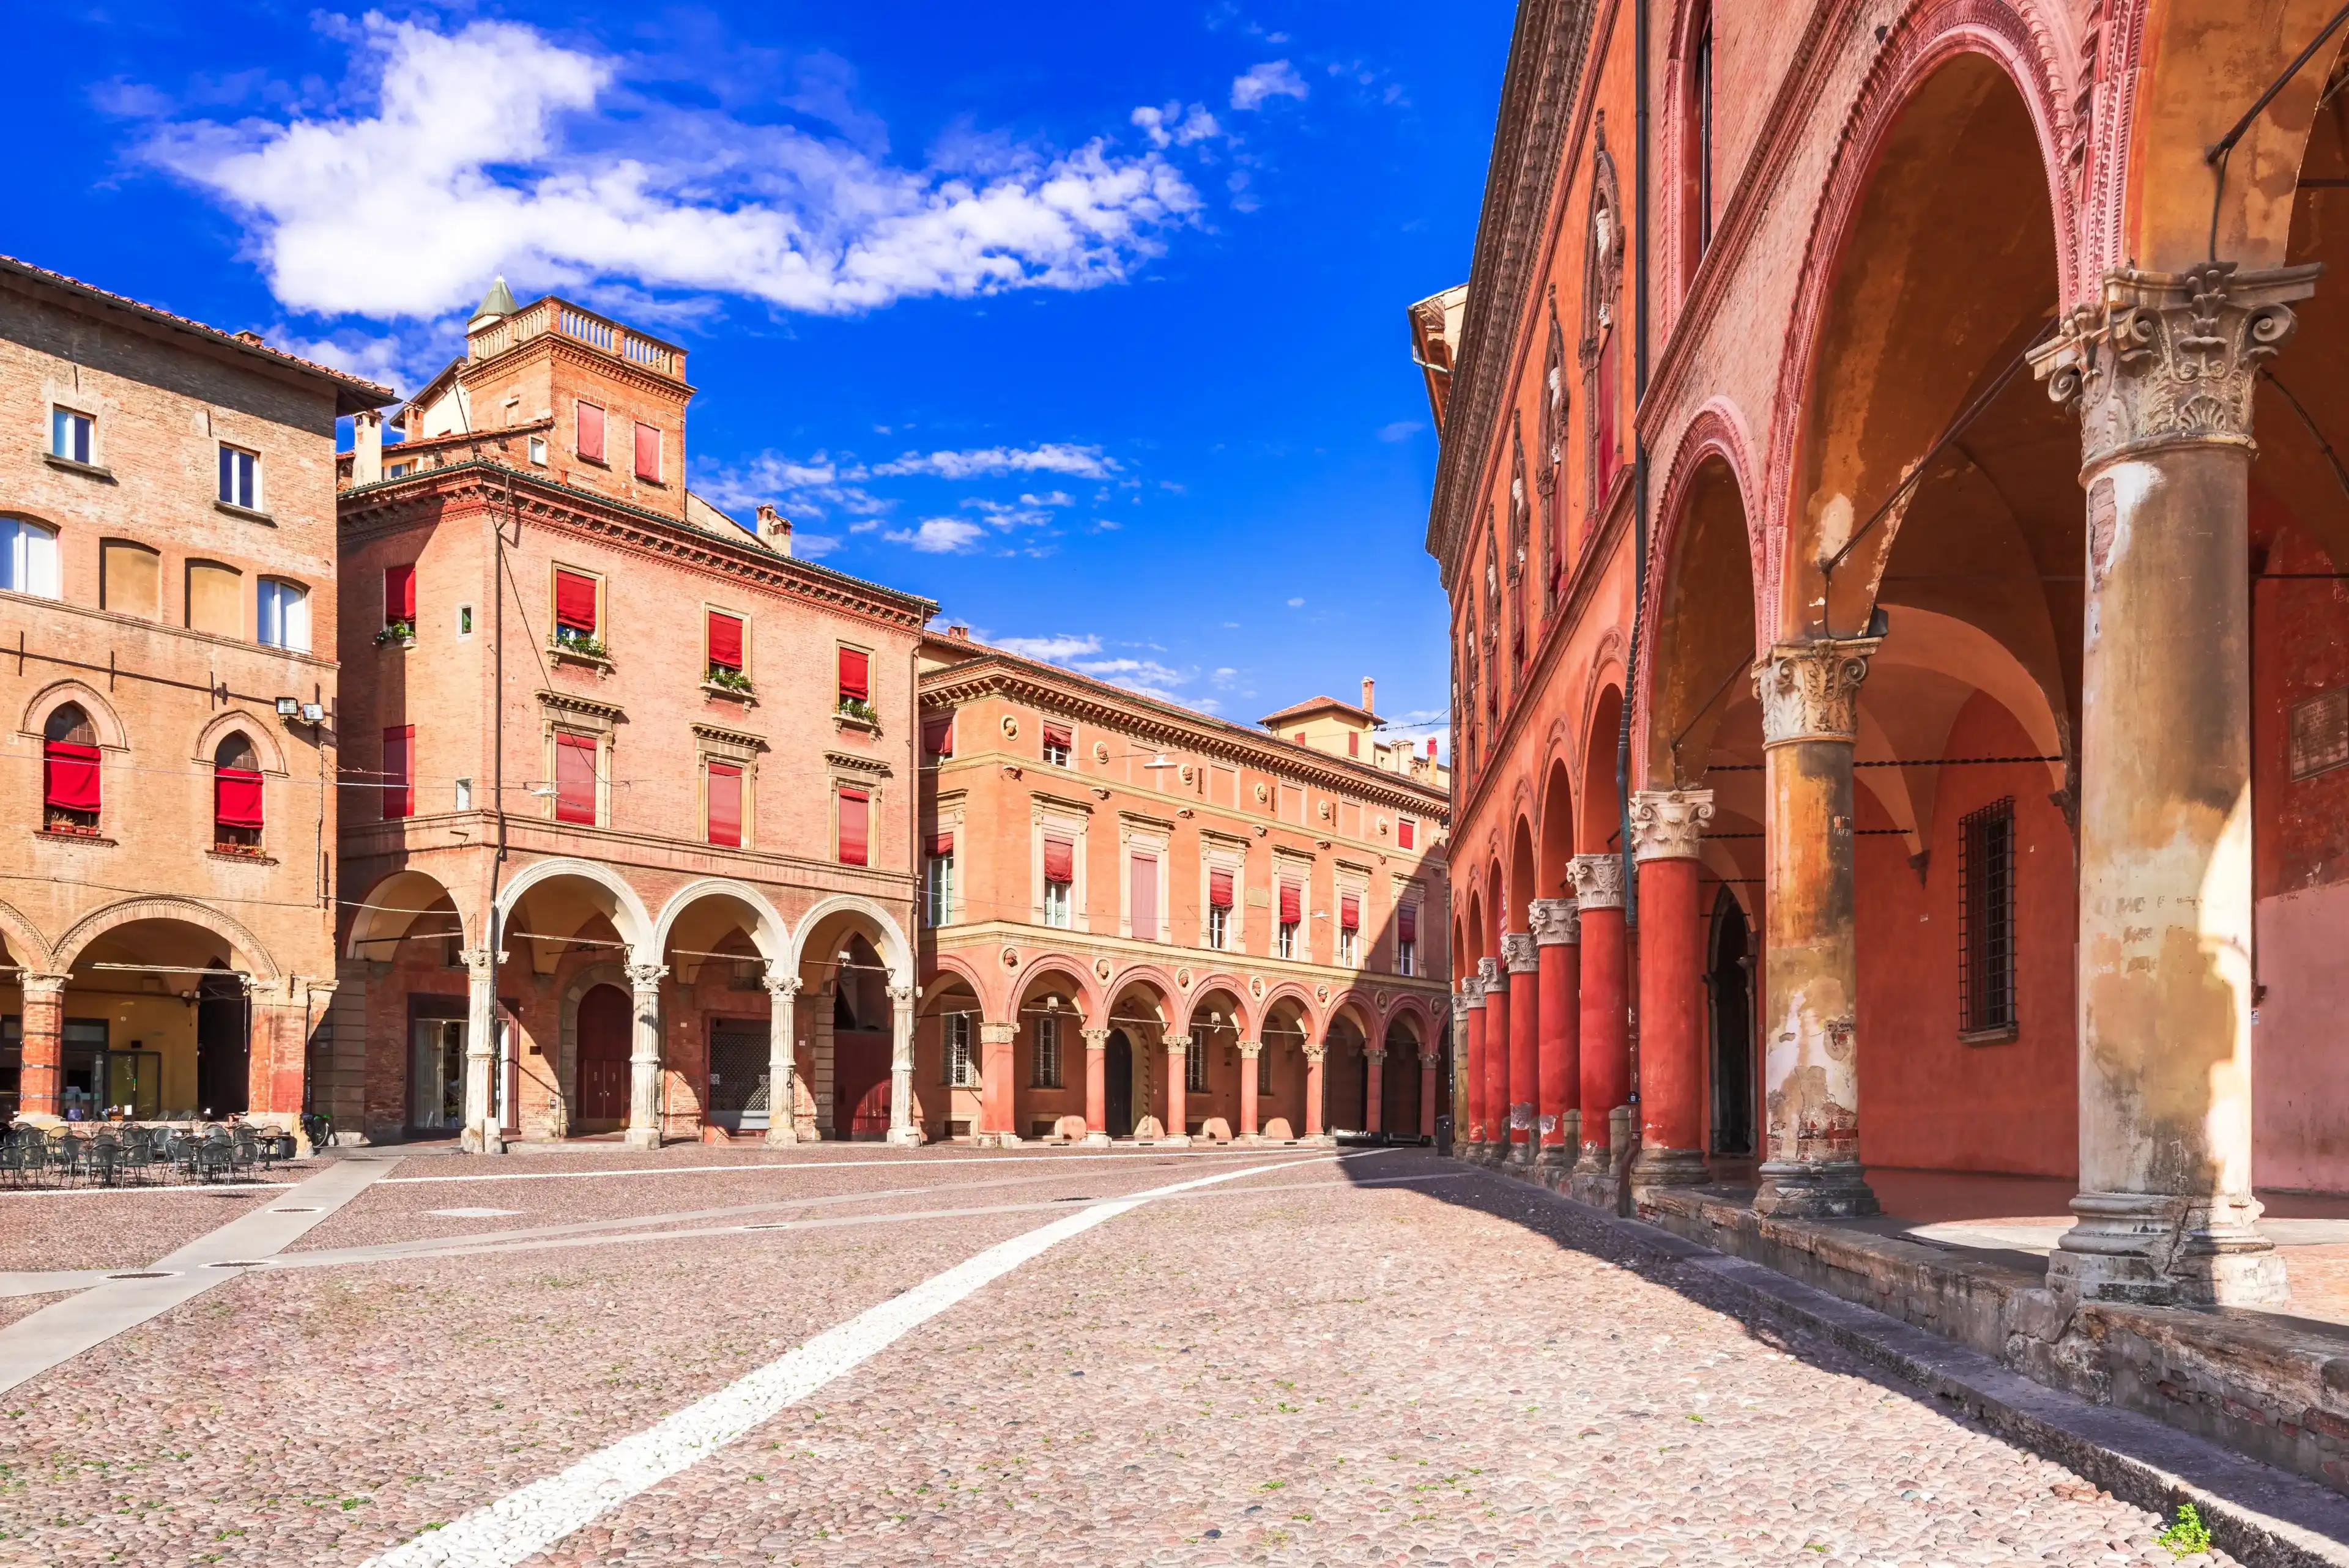 Best Bologna hotels. Cheap hotels in Bologna, Italy